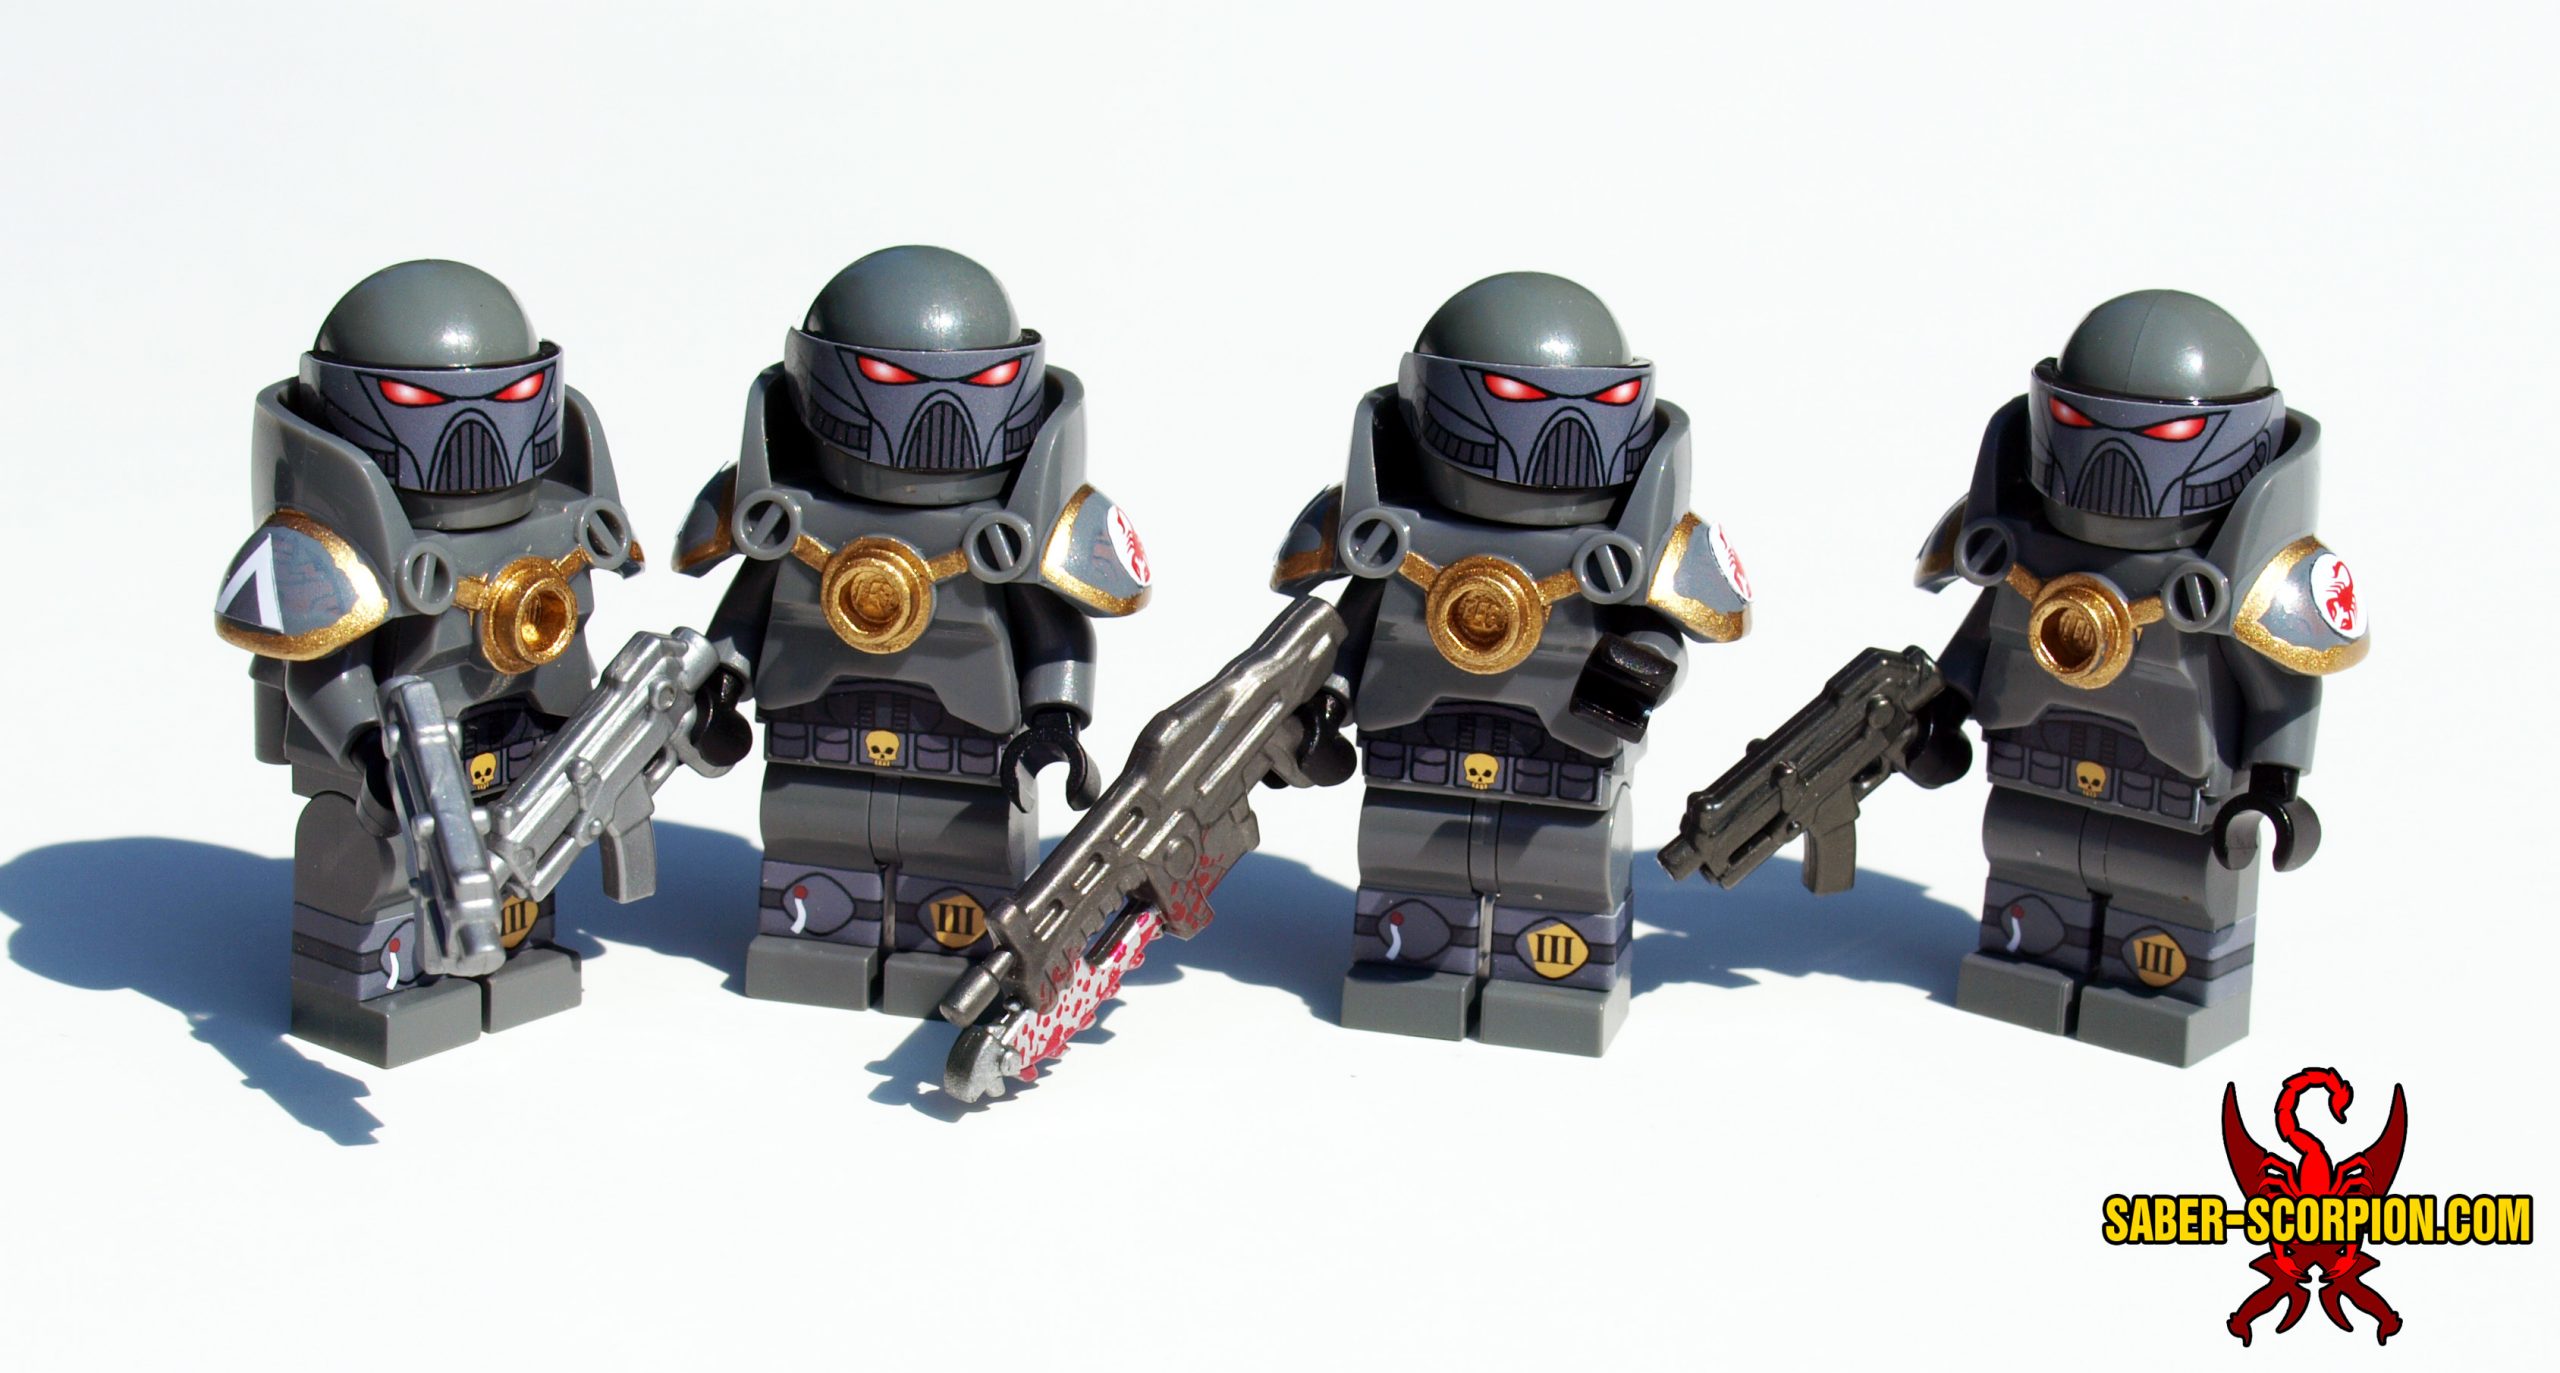 Tilståelse pause bagværk Stickers: Sci-Fi Ultra Space Marines – Saber-Scorpion's Lair – Custom LEGO  Minifigs, Stickers, & Weapons